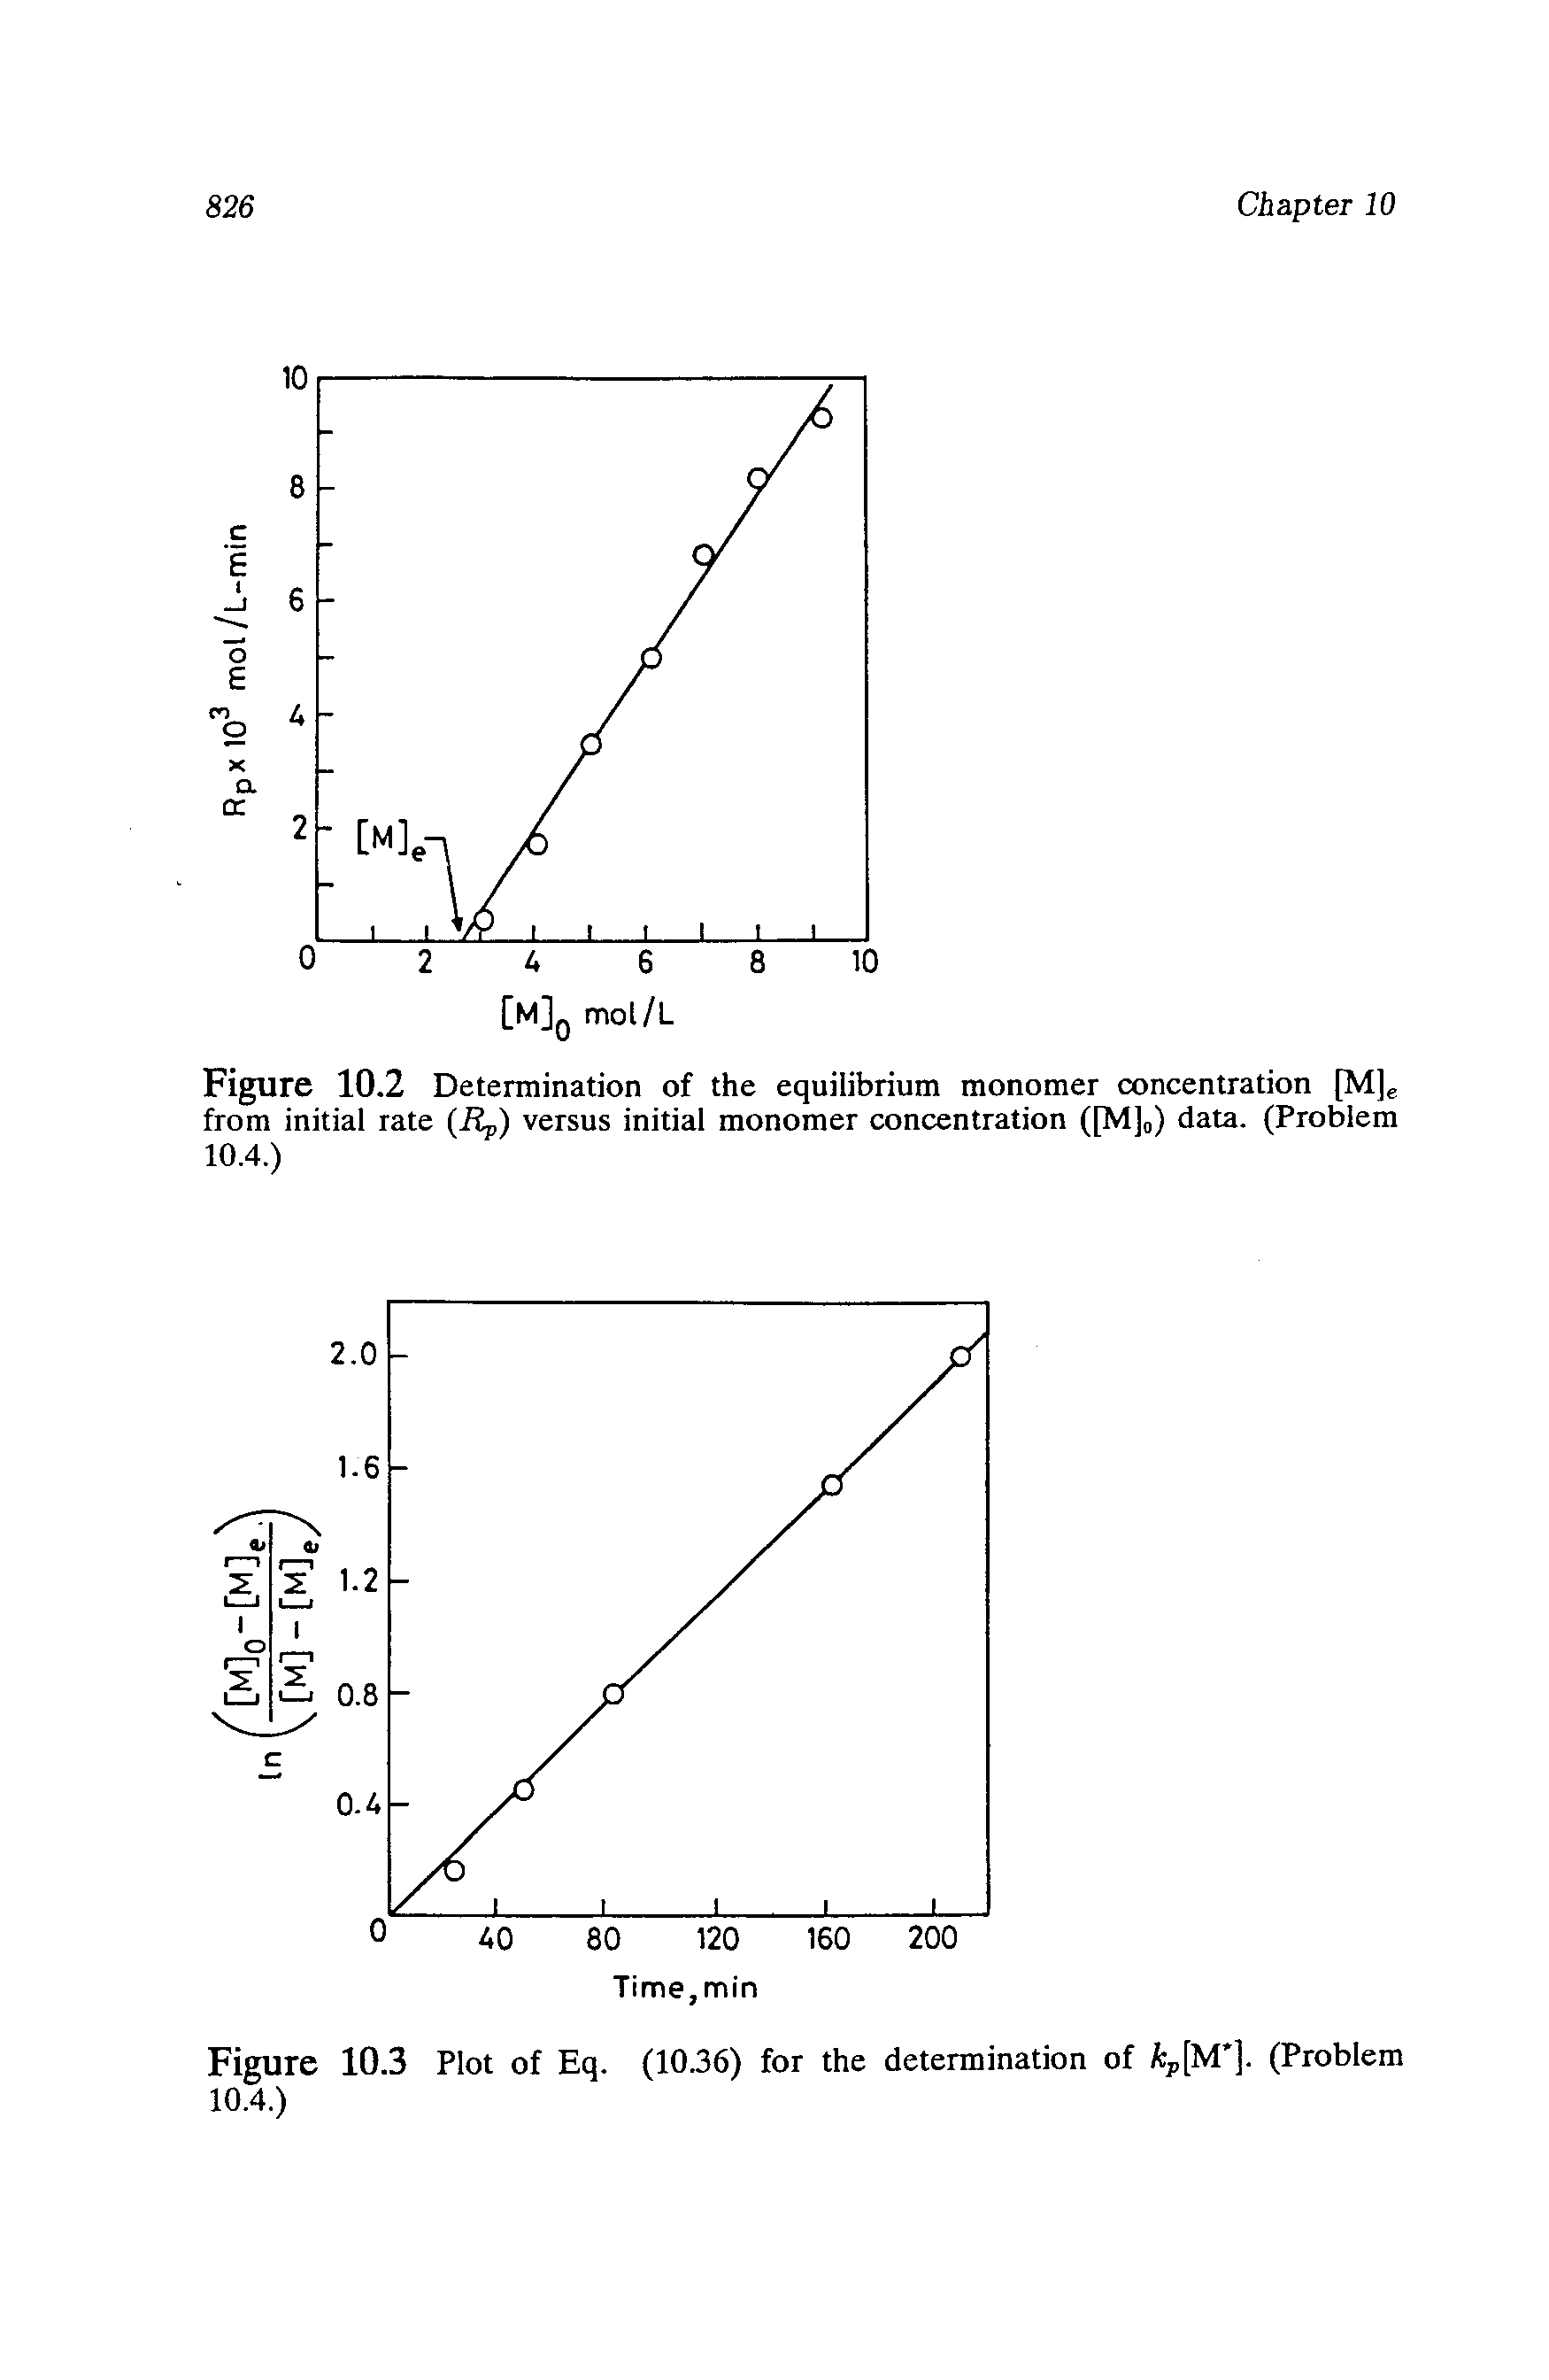 Figure 10.2 Determination of the equilibrium monomer concentration [M]e from initial rate (Rj,) versus initial monomer concentration ([M] ) data. (Problem 10.4.)...